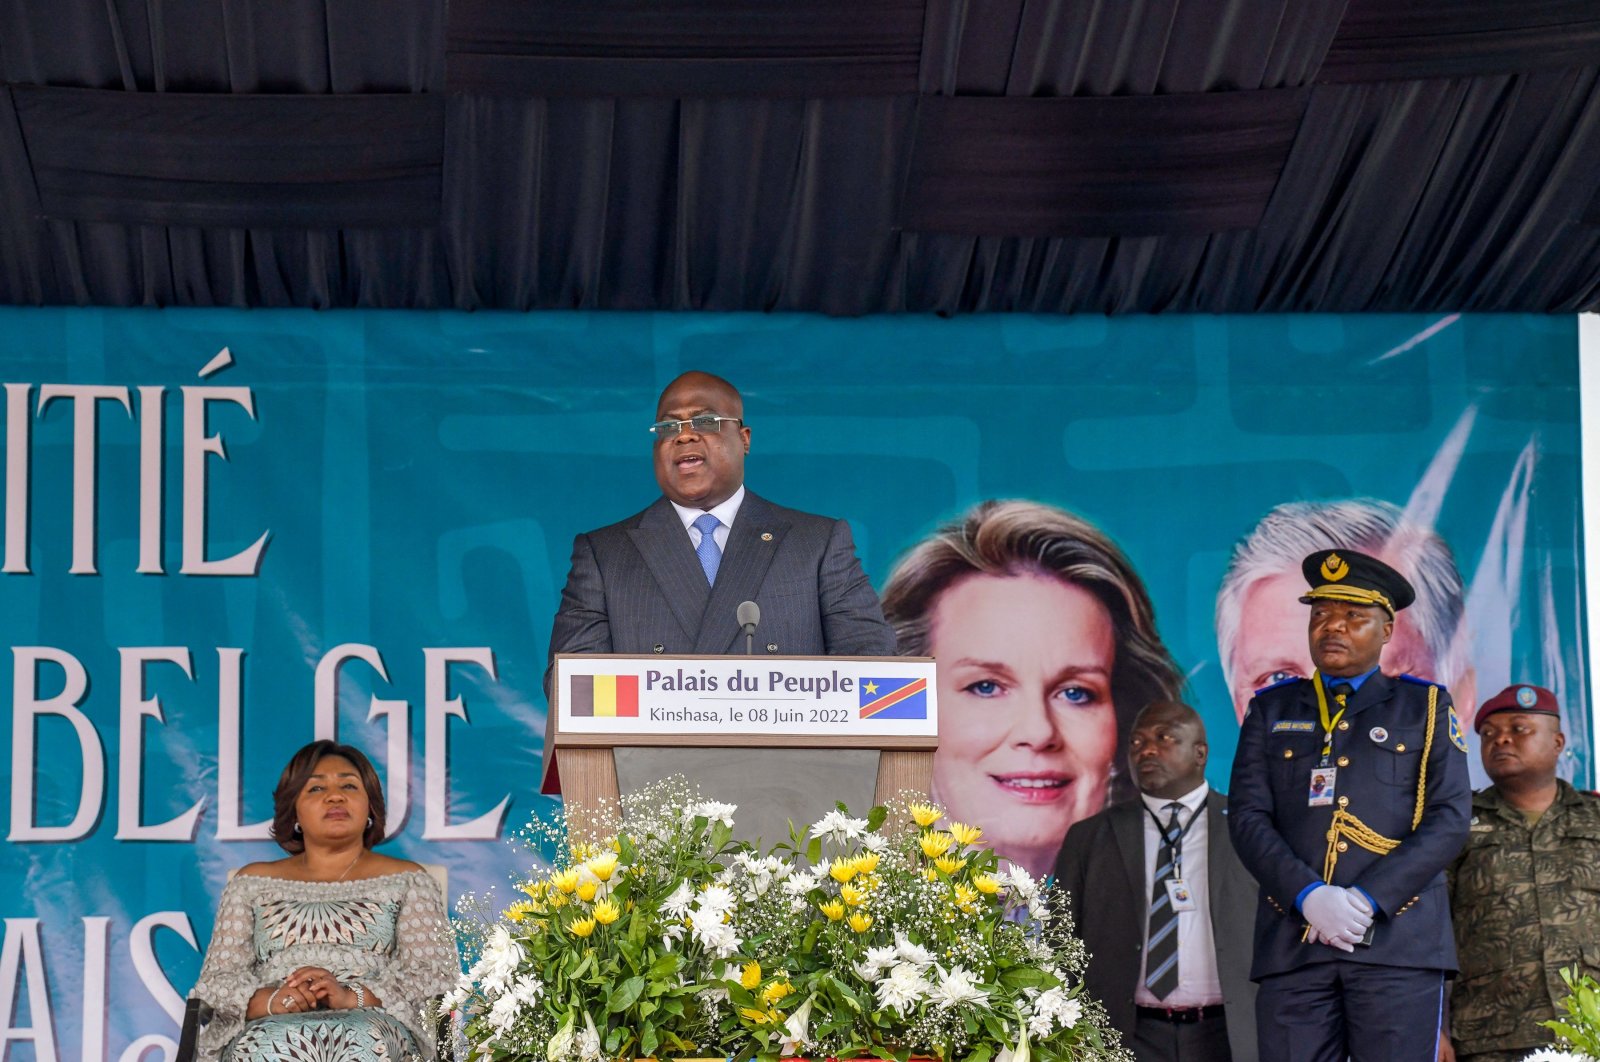 Democratic republic of Congo President Felix Tshisekedi addresses the crowd as his wife Denise Nyakeru Tshisekedi (L) looks on during a ceremony at the National Assembly in Kinshasa, June 8, 2022 (AFP Photo)